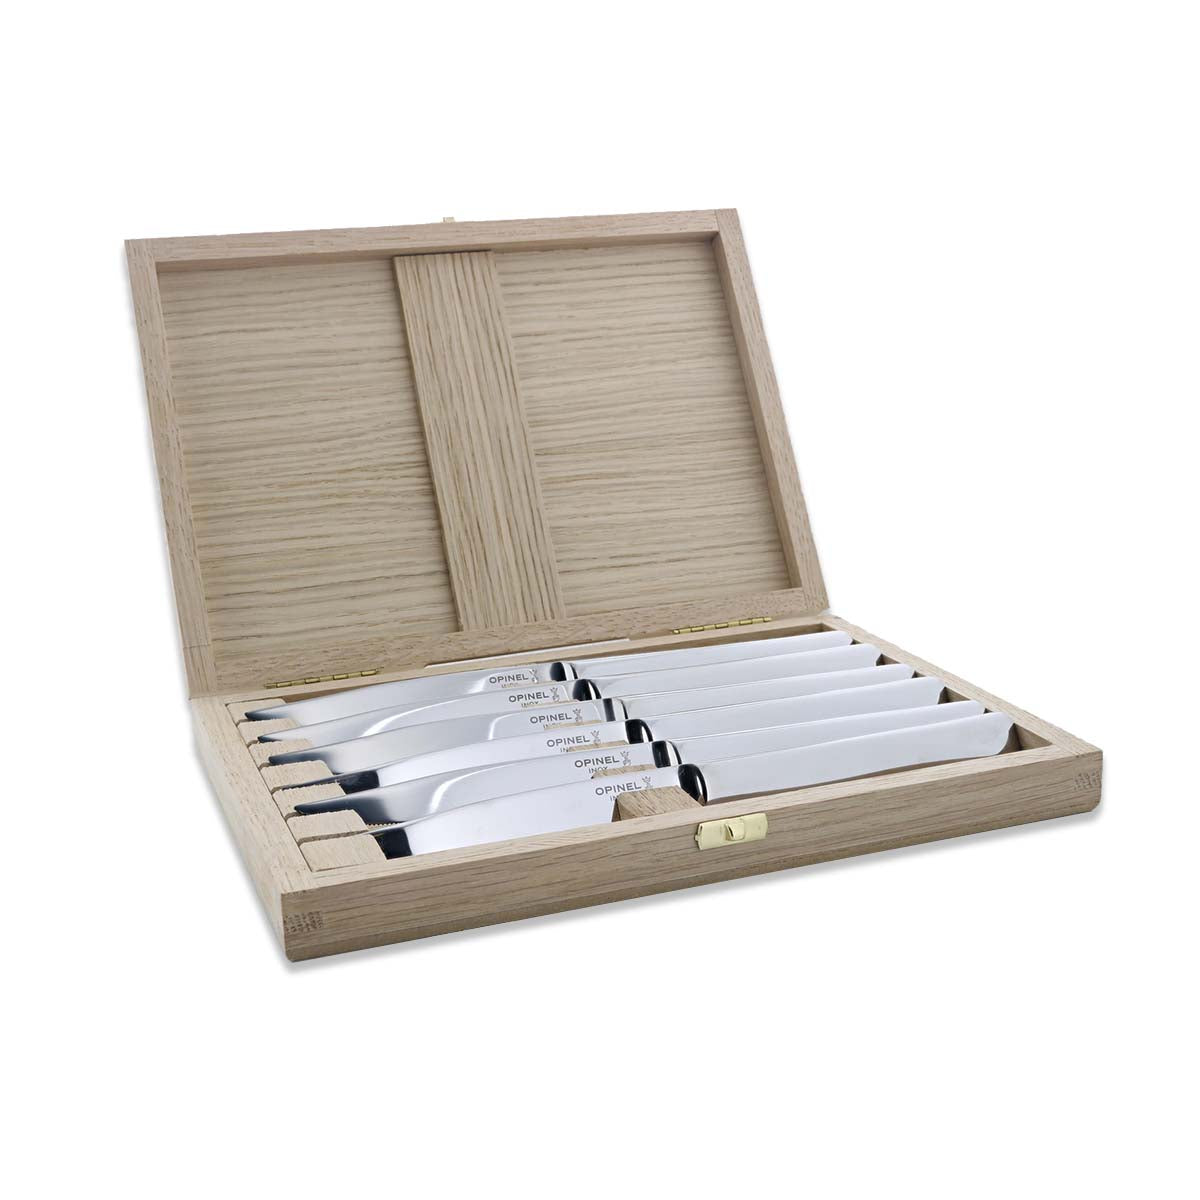 Steak Knife Set of 4 in Wooden Gift Box - Unique New Gift Idea